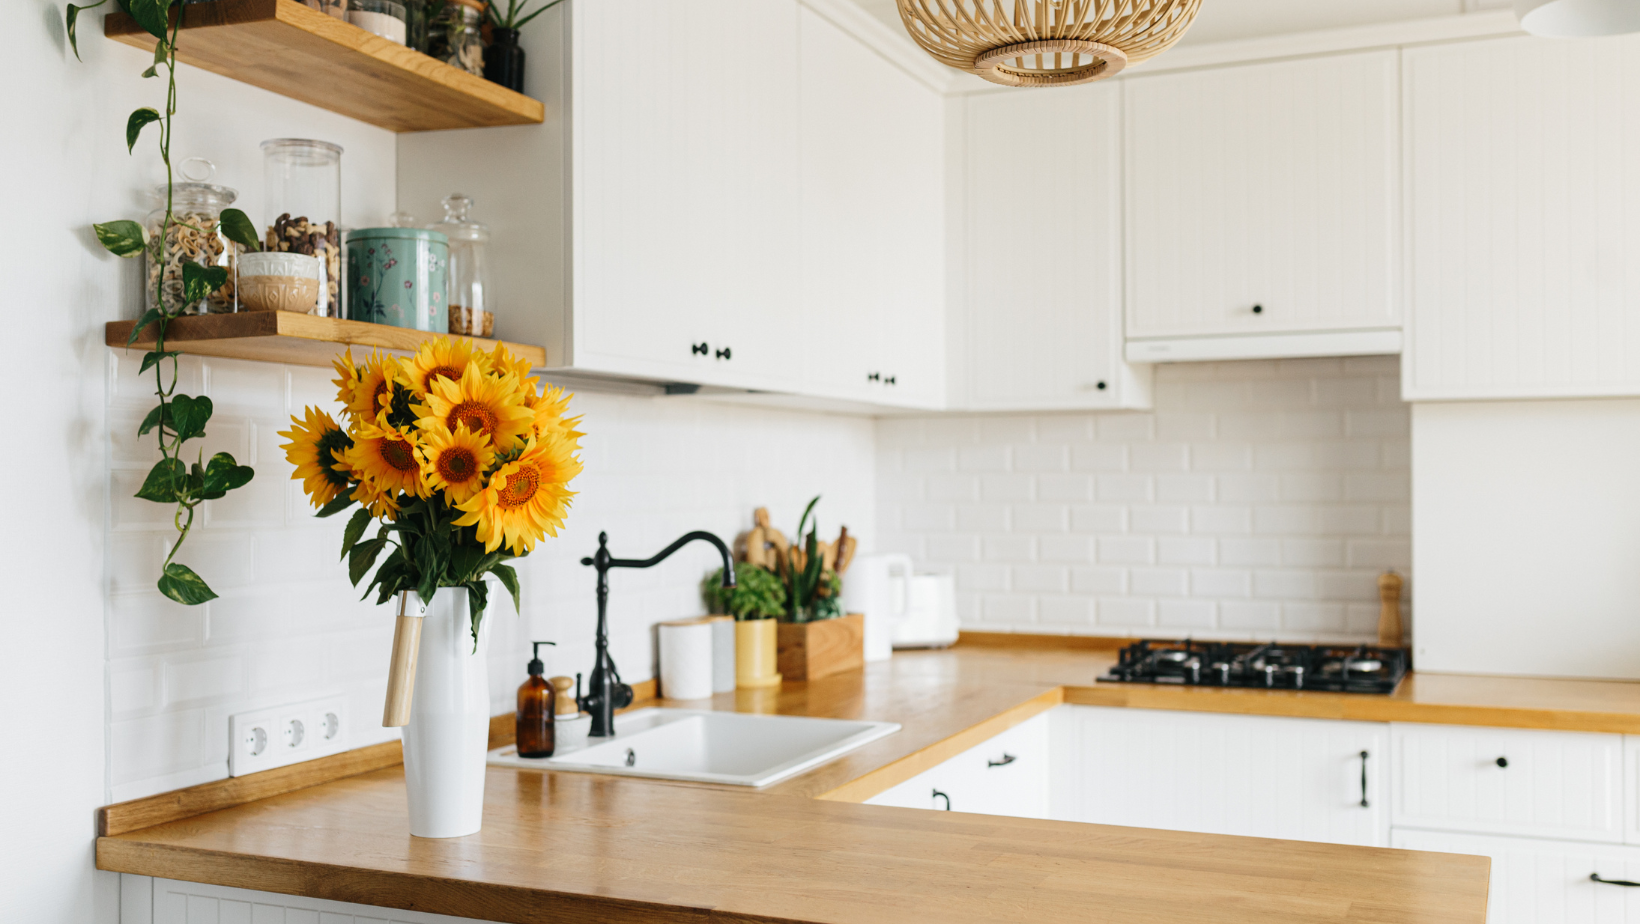 Kitchen with white cabinets, butcher block countertops, and a bouquet of sunflowers.